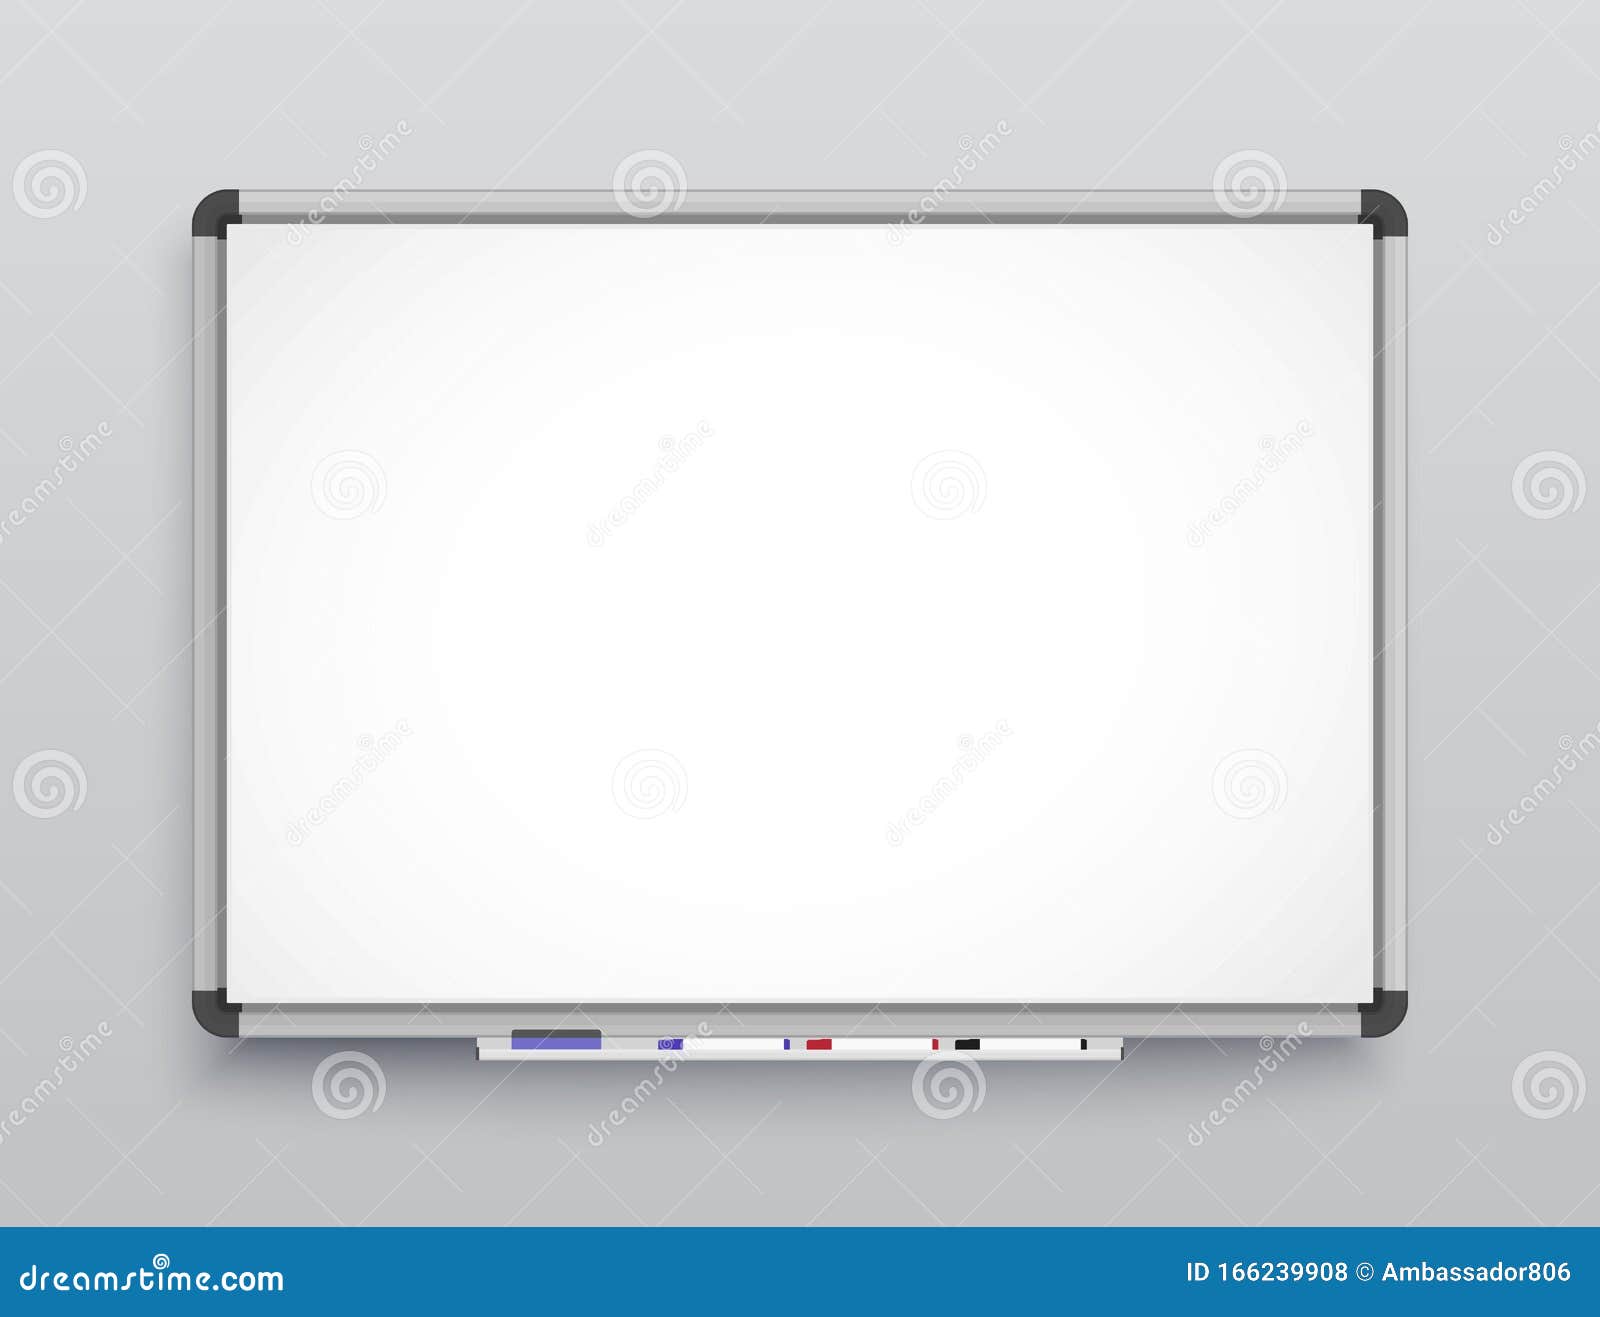 Whiteboard for Markers. Presentation, Empty Projection Screen. Office Board  Background Frame Stock Vector - Illustration of clean, business: 166239908